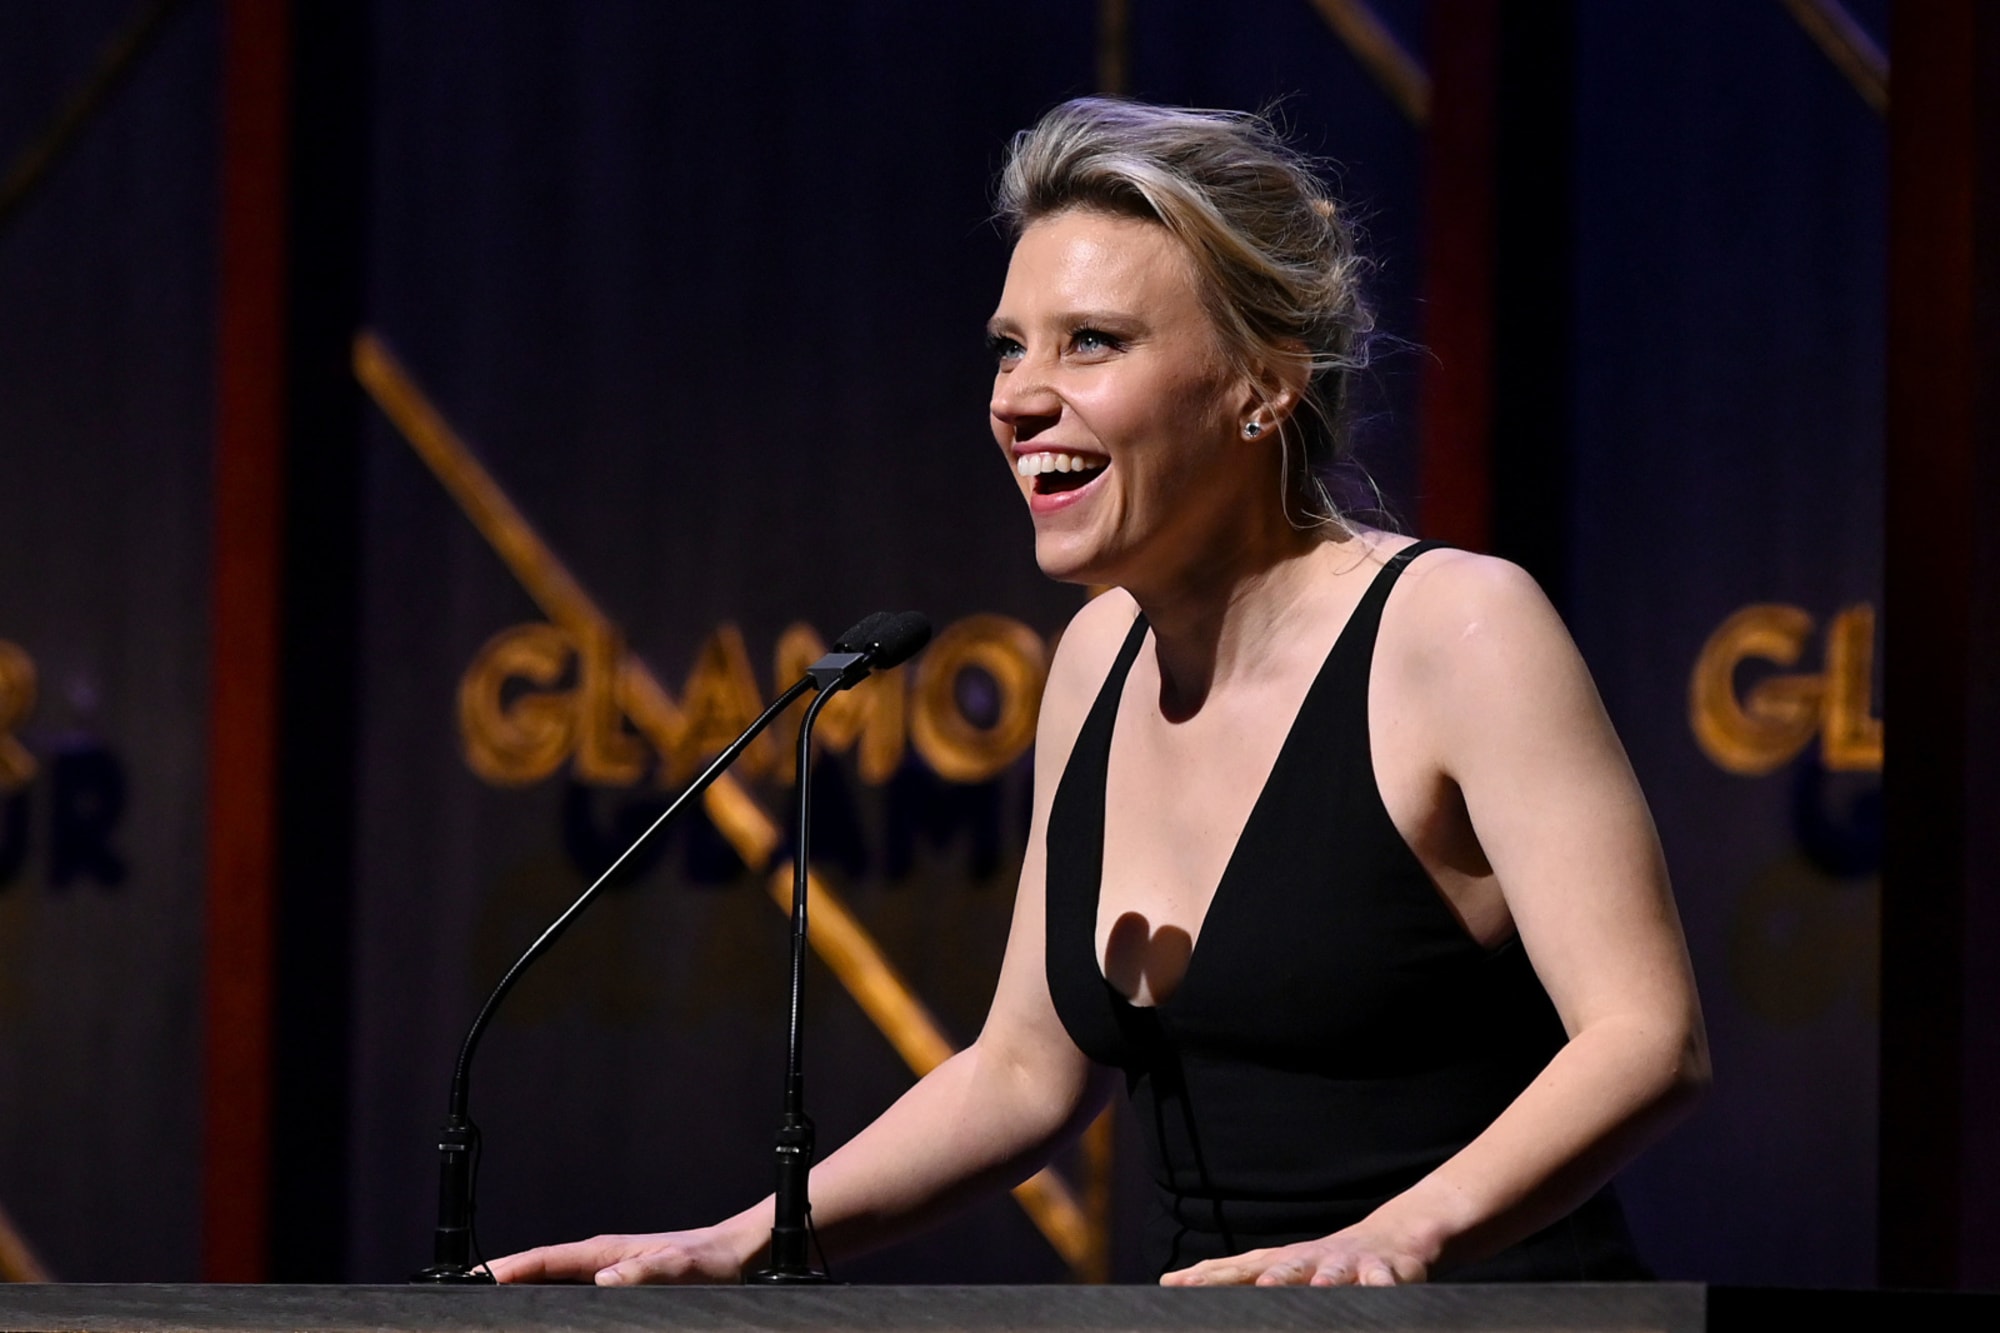 Pictures of kate mckinnon